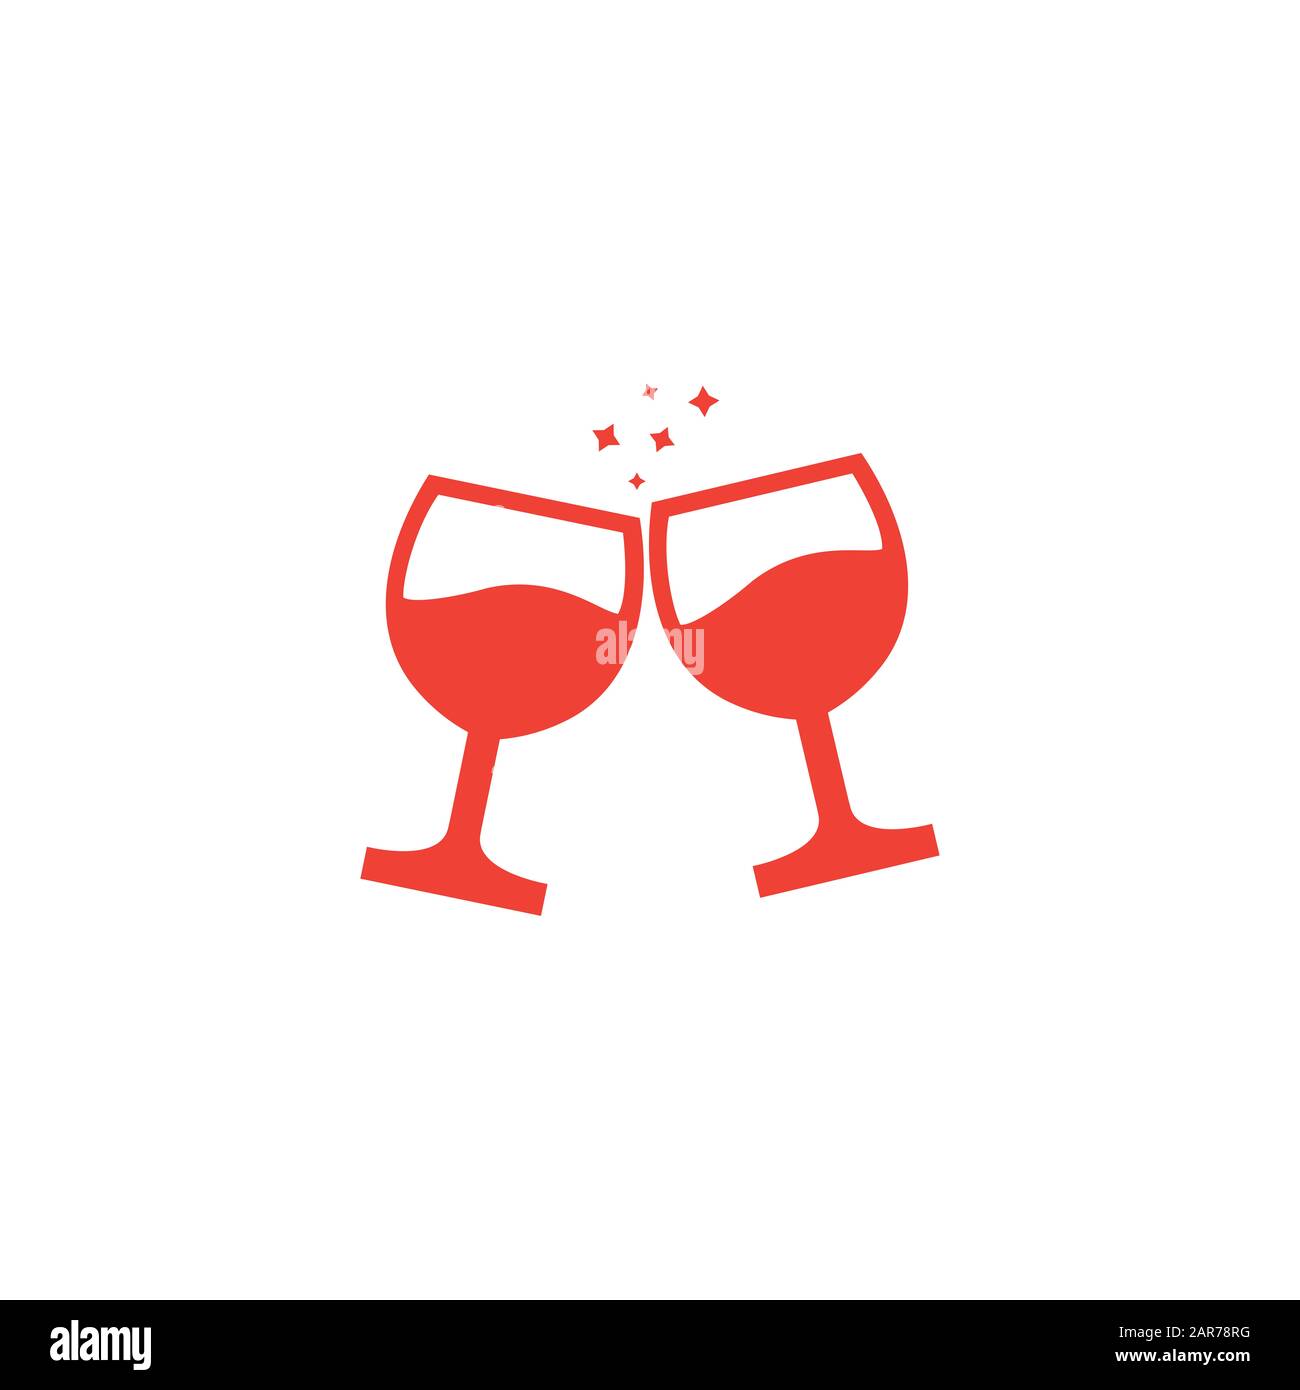 https://c8.alamy.com/comp/2AR78RG/wine-glasses-toast-red-icon-on-white-background-red-flat-style-vector-illustration-2AR78RG.jpg